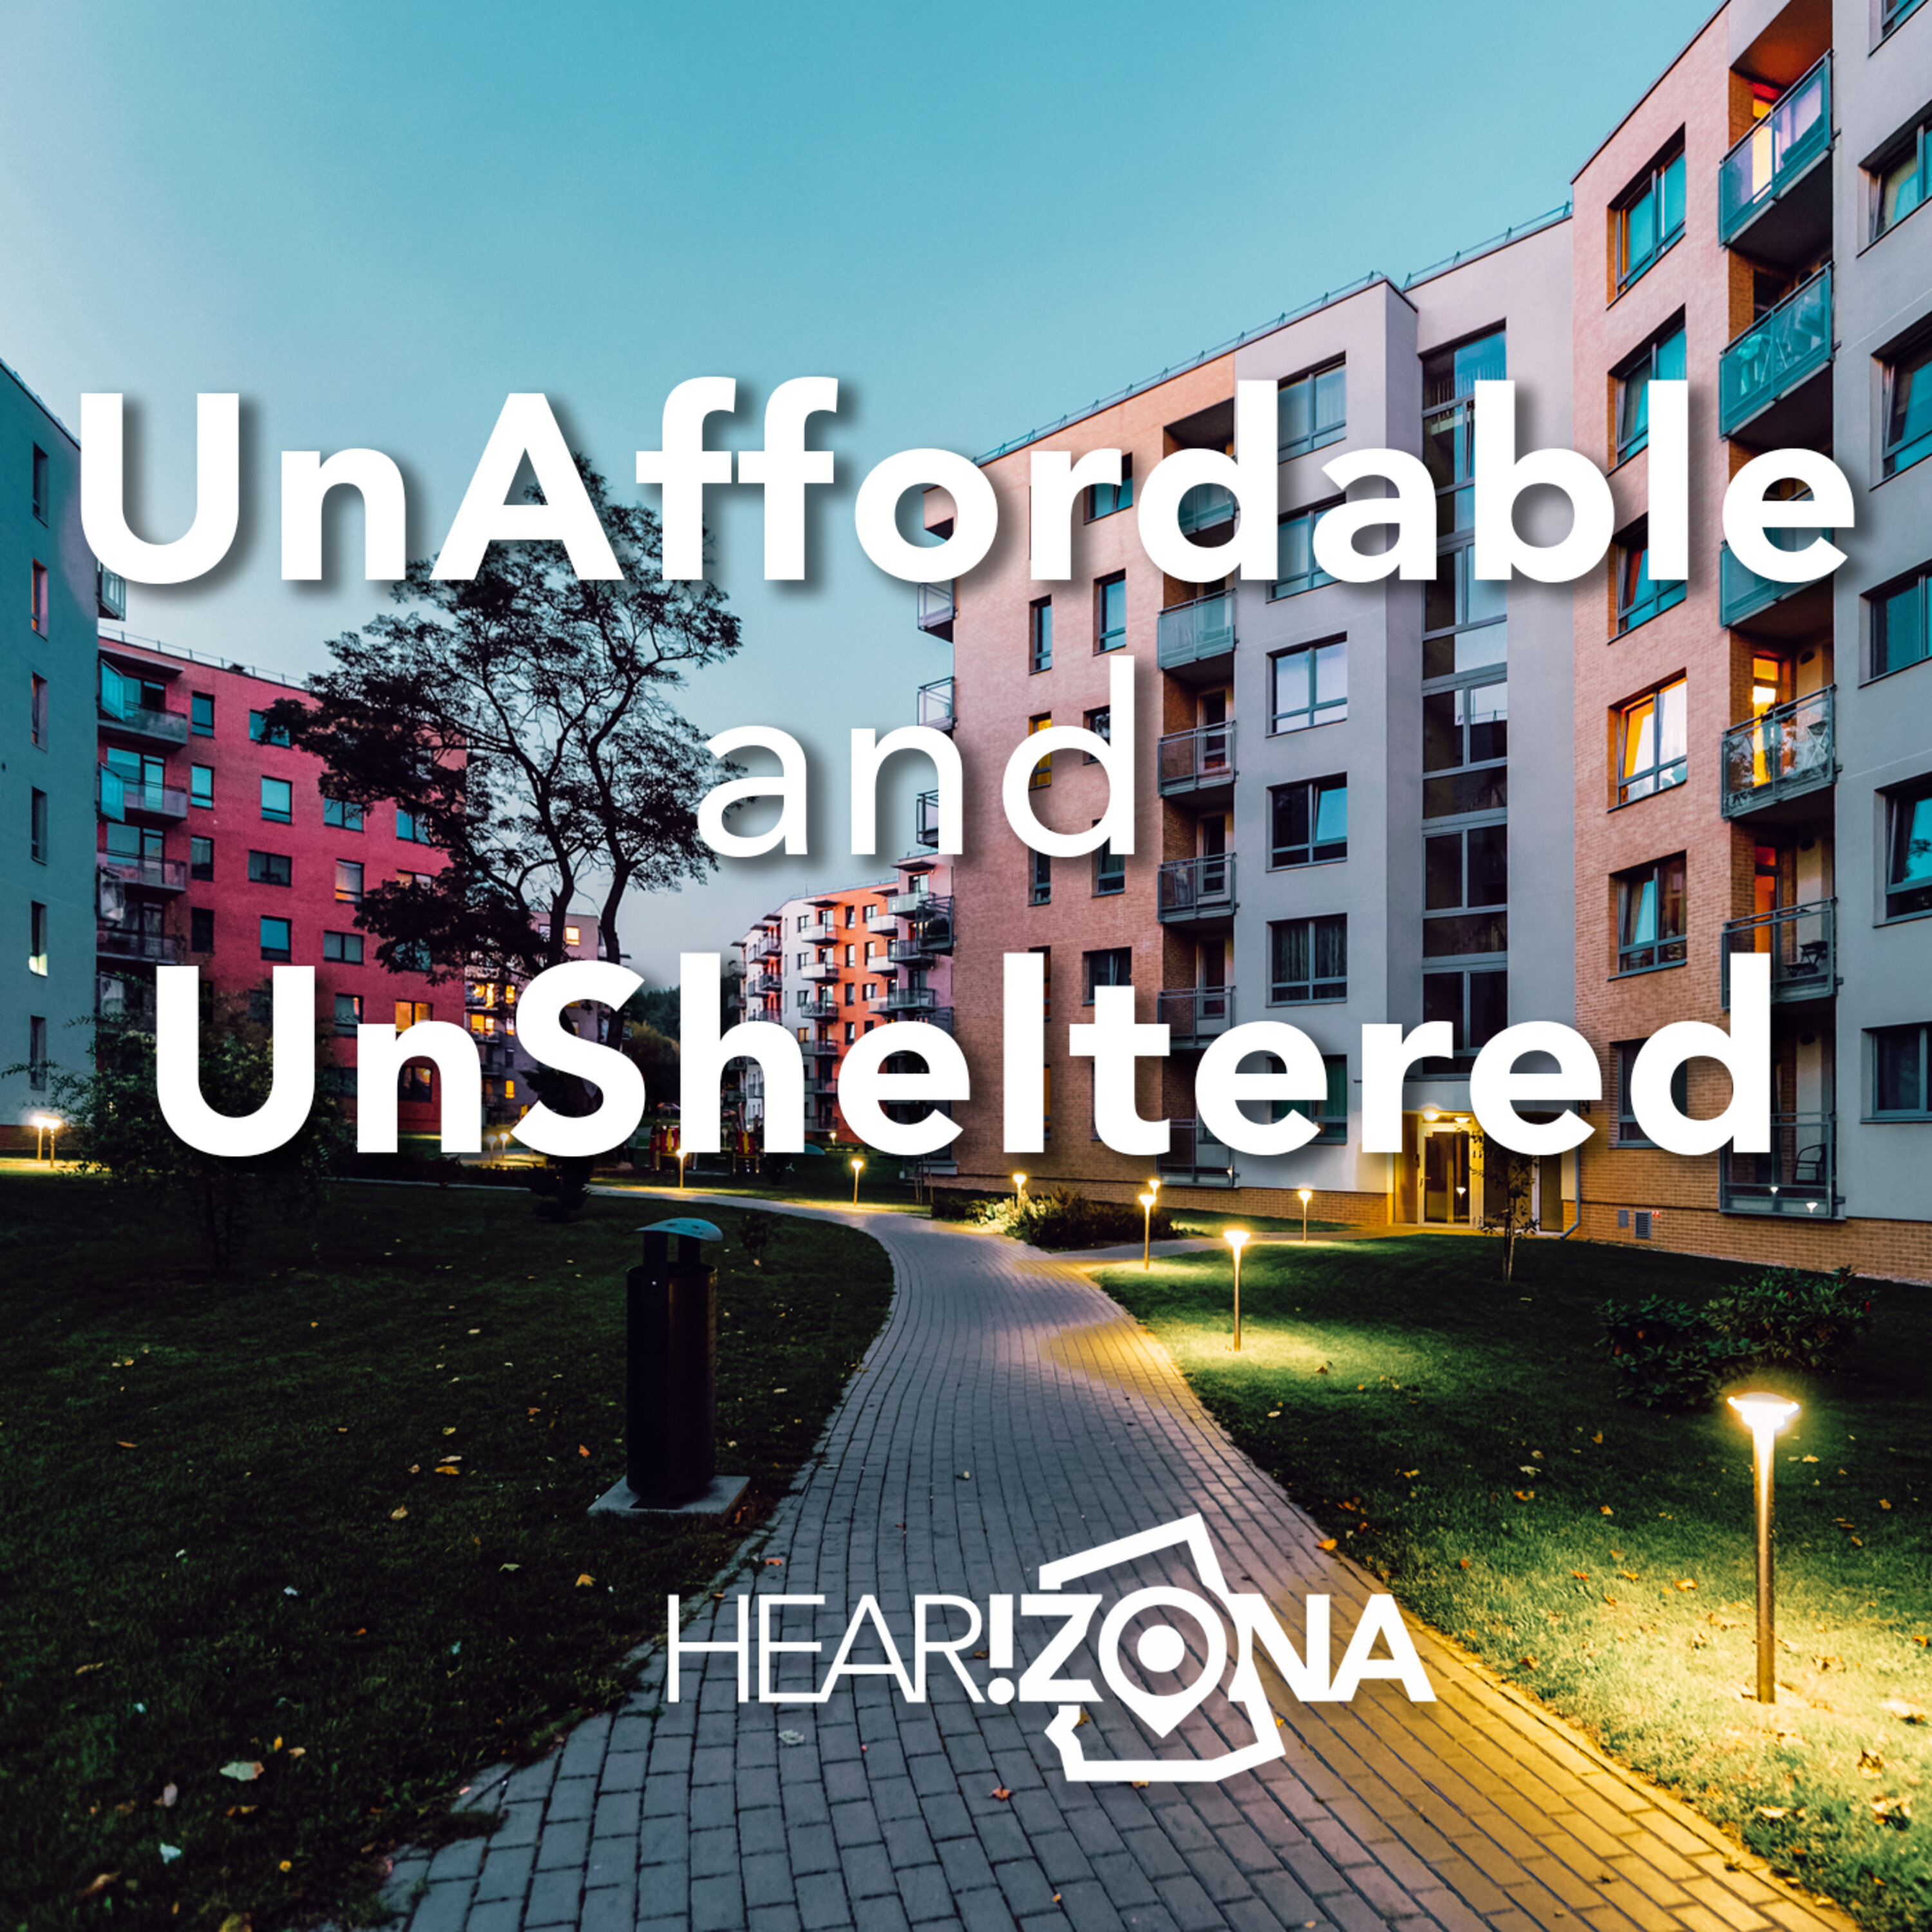 UnAffordable and UnSheltered